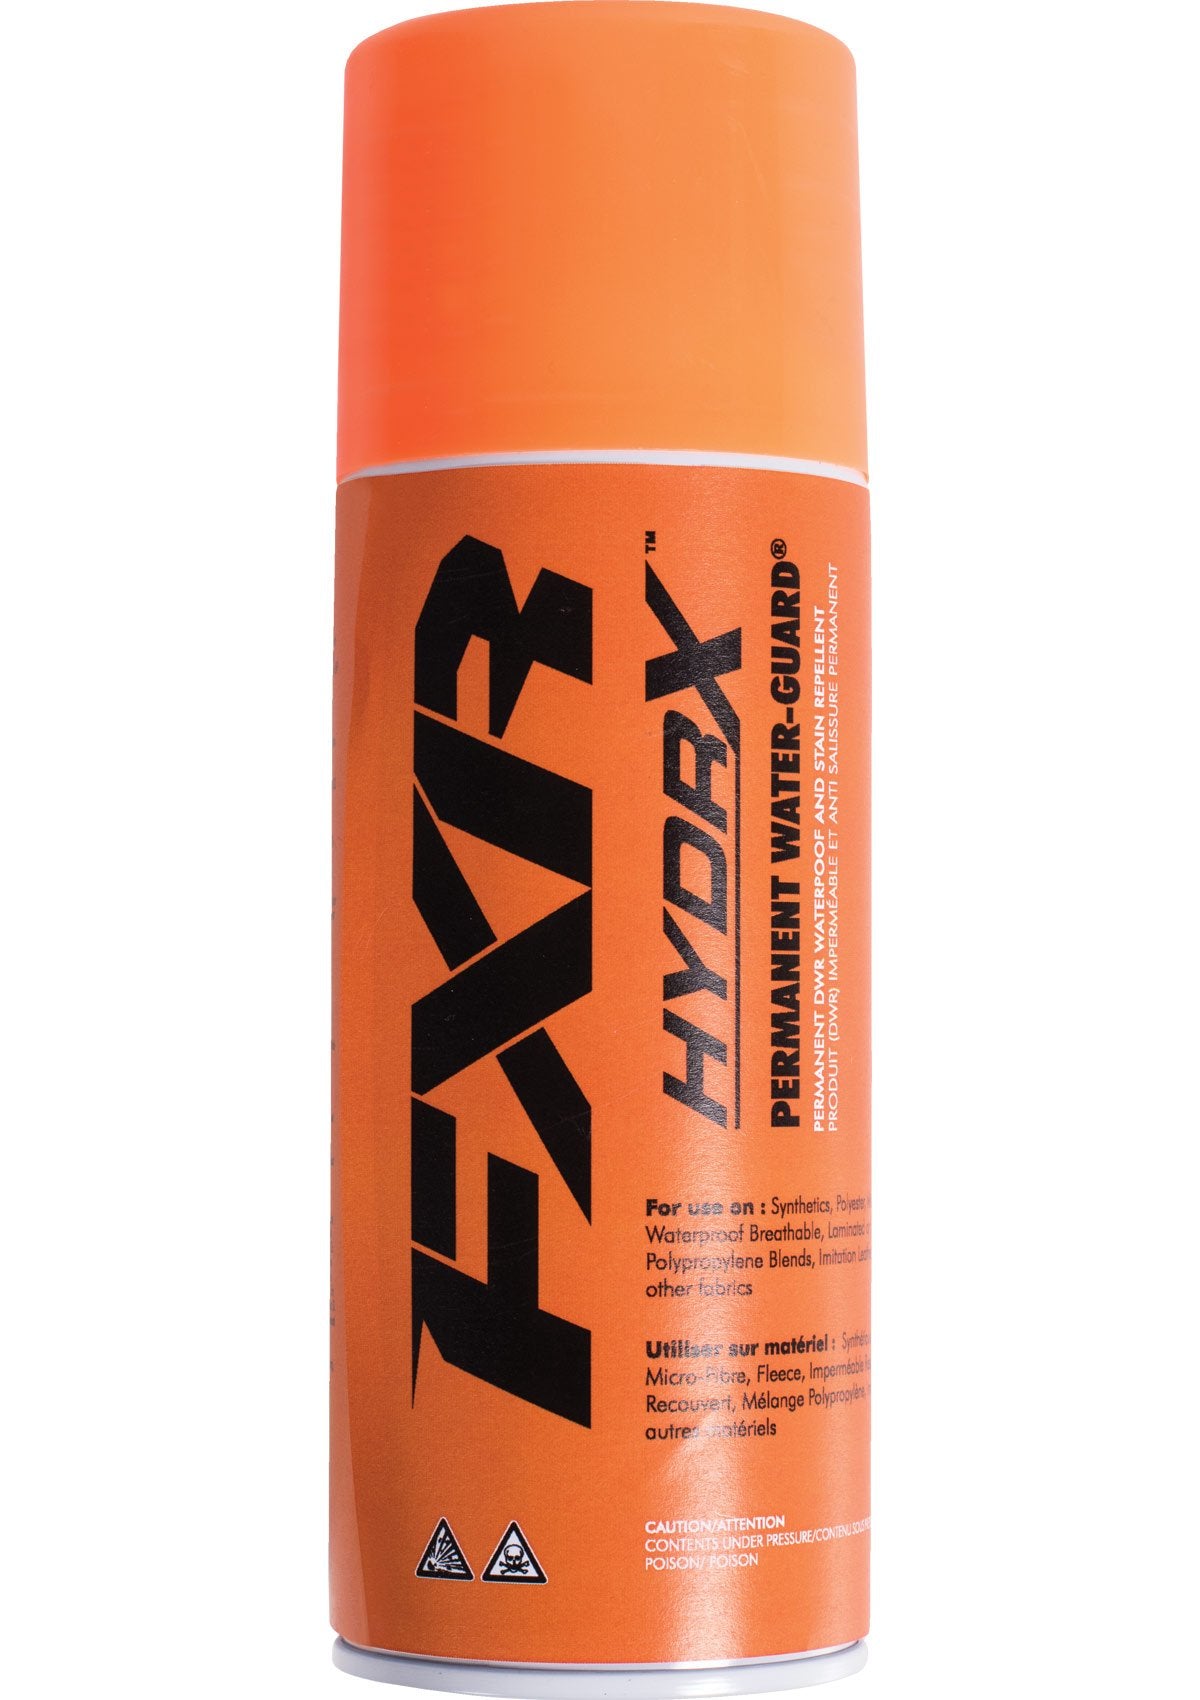 FXR Hydrx Permanent Water-Guard